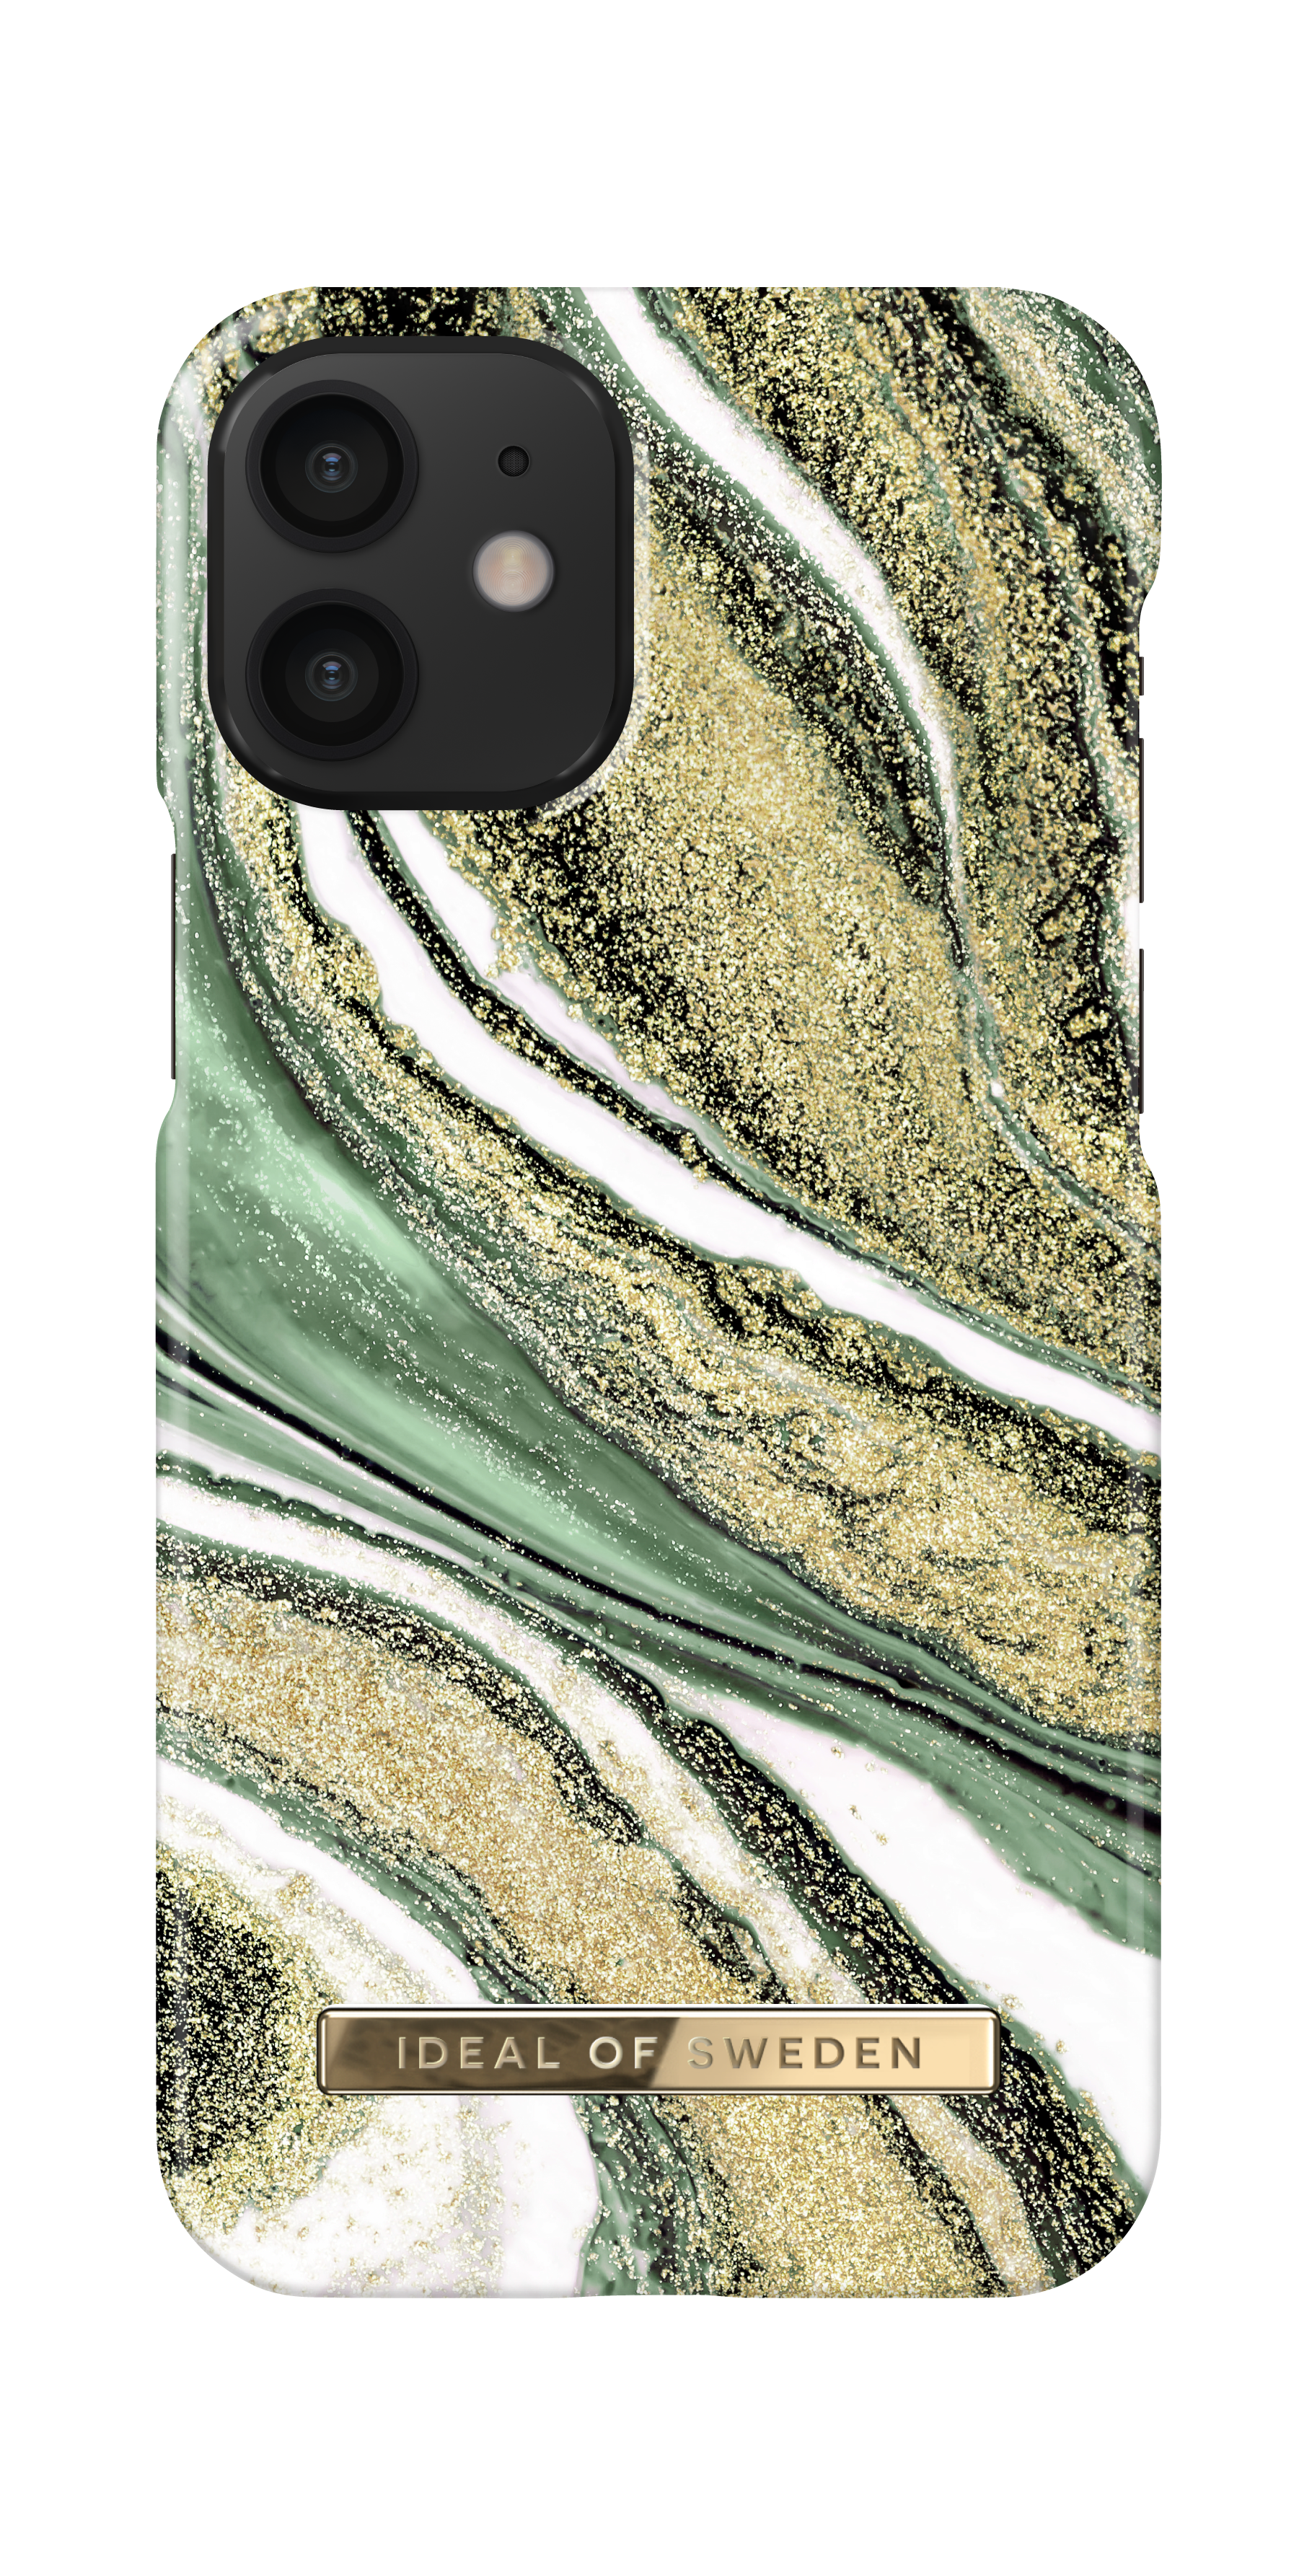 IDEAL OF Green IDFCSS20-I2054-192, SWEDEN IPhone Cosmic Backcover, Apple, Swirl 12 Mini